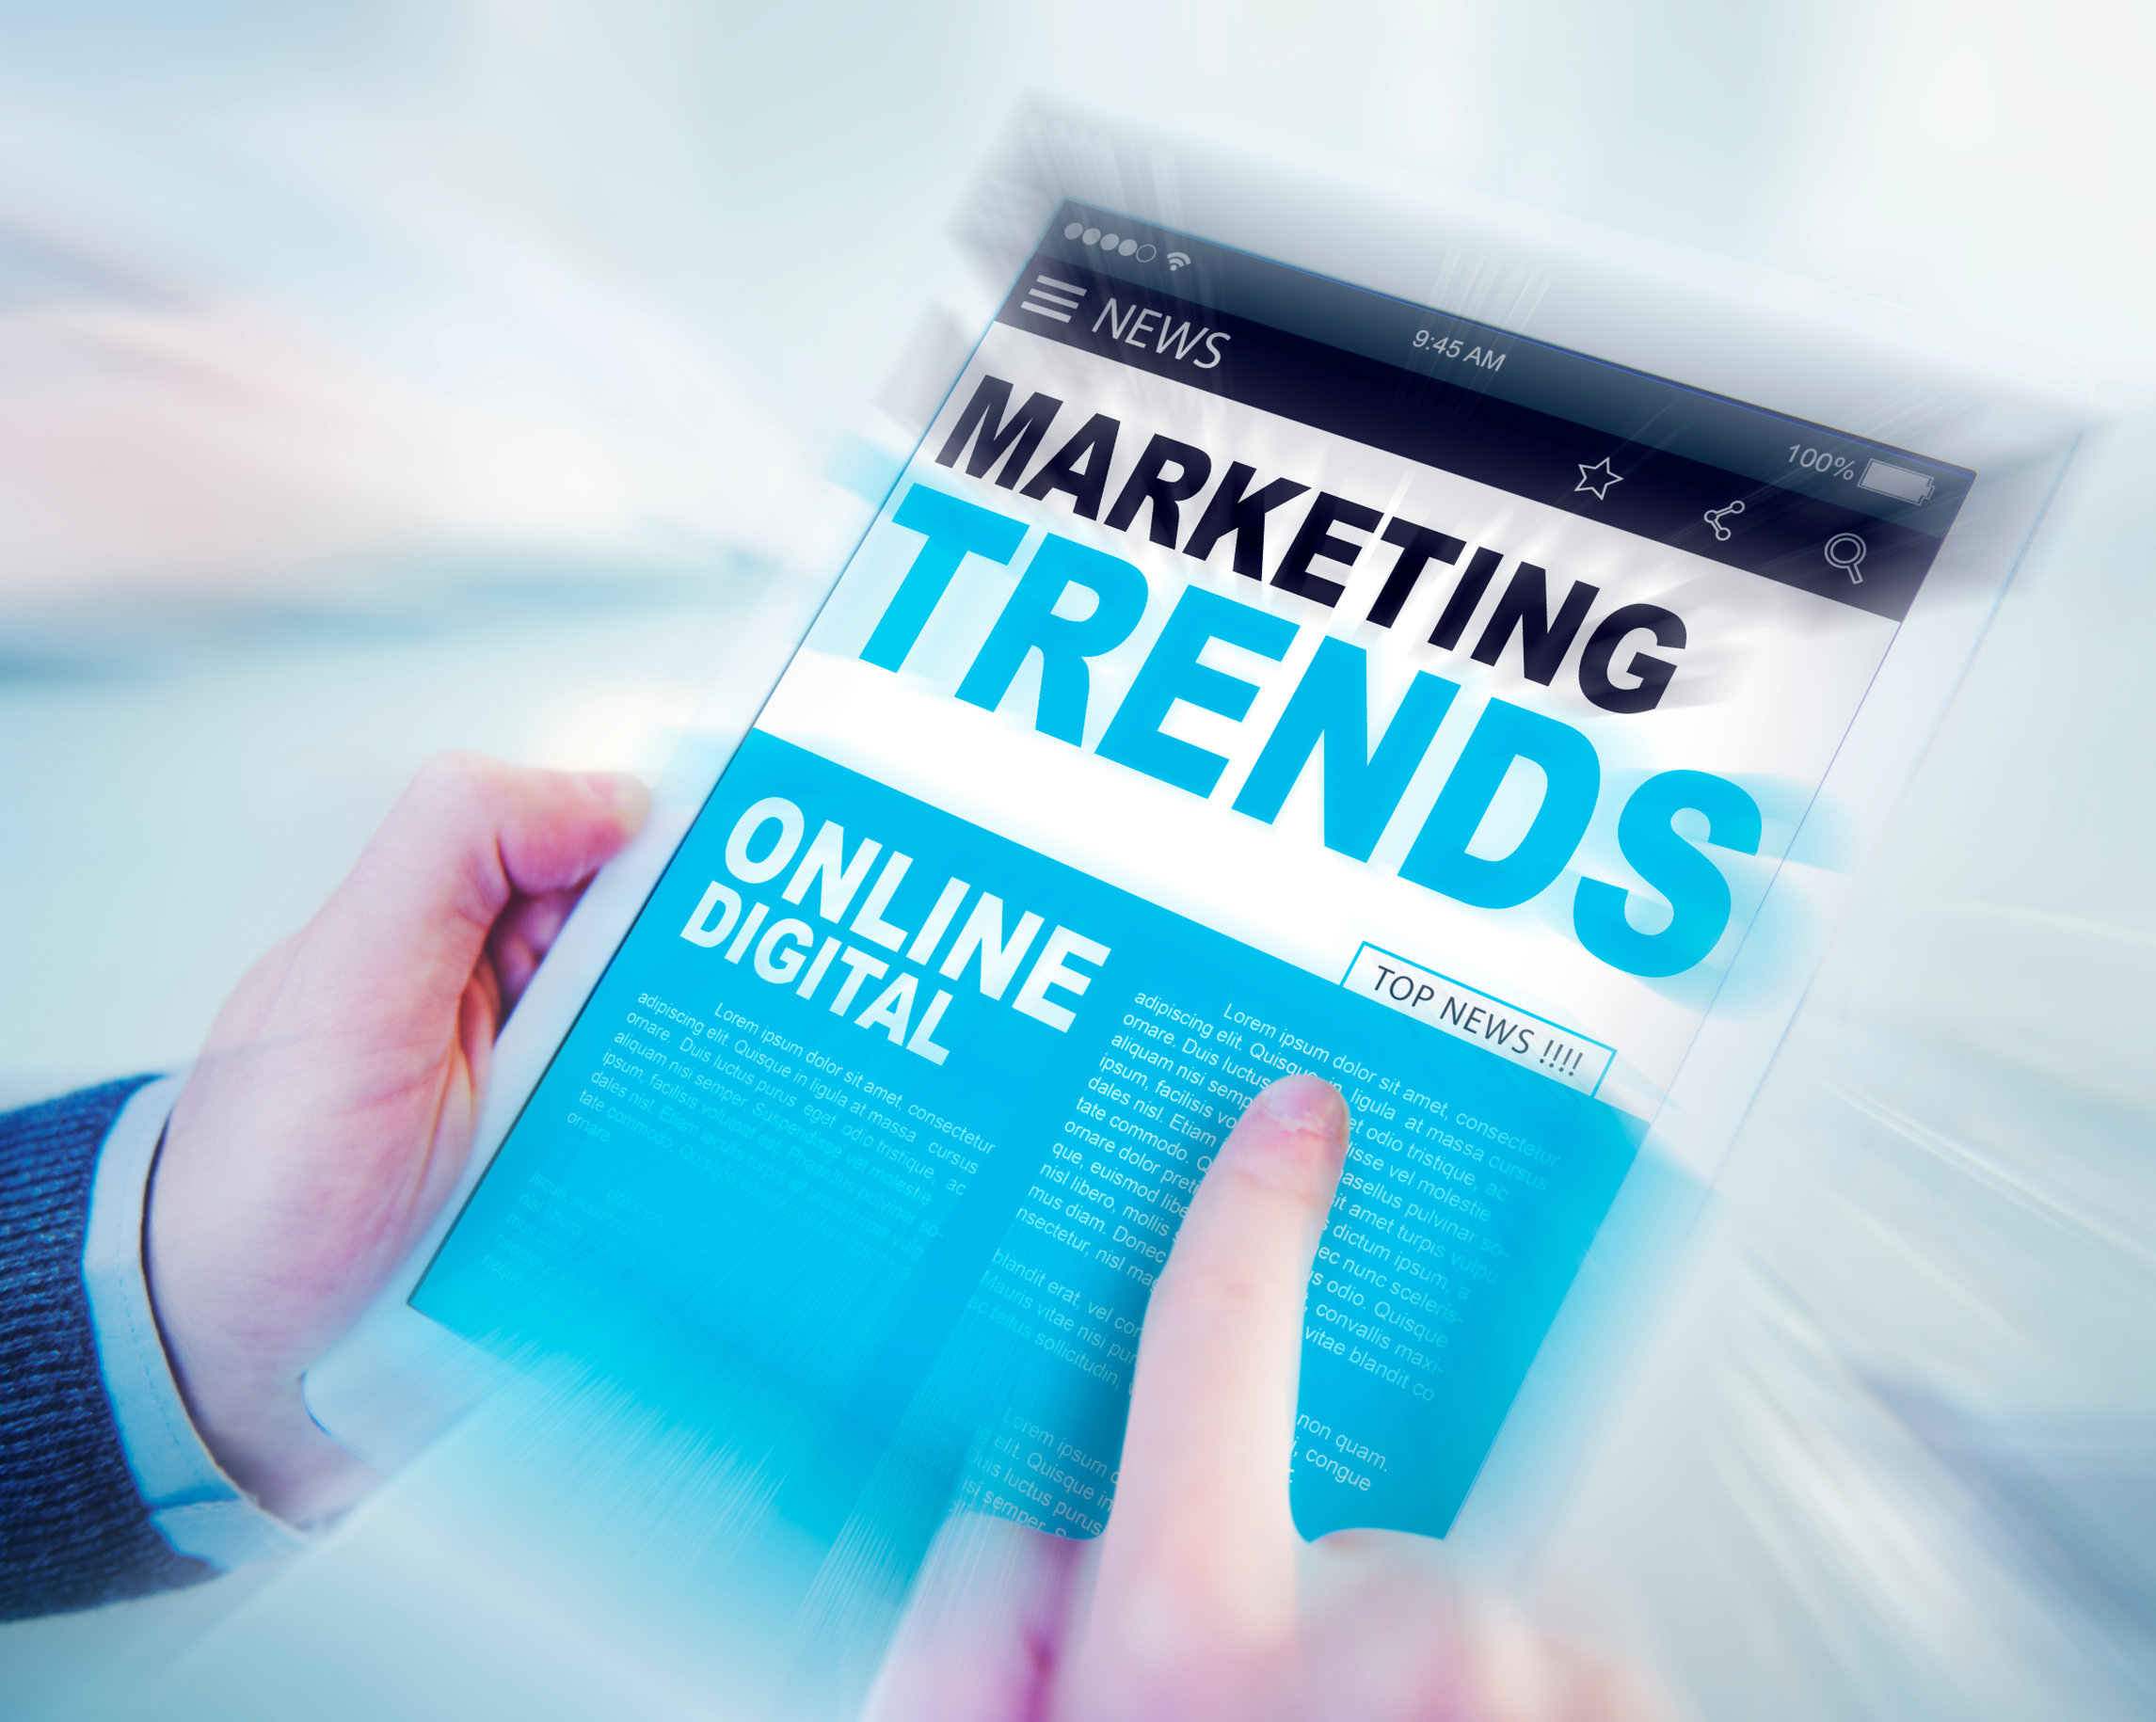 Top Marketing Trends - How to Successfully Navigate Digital Marketing